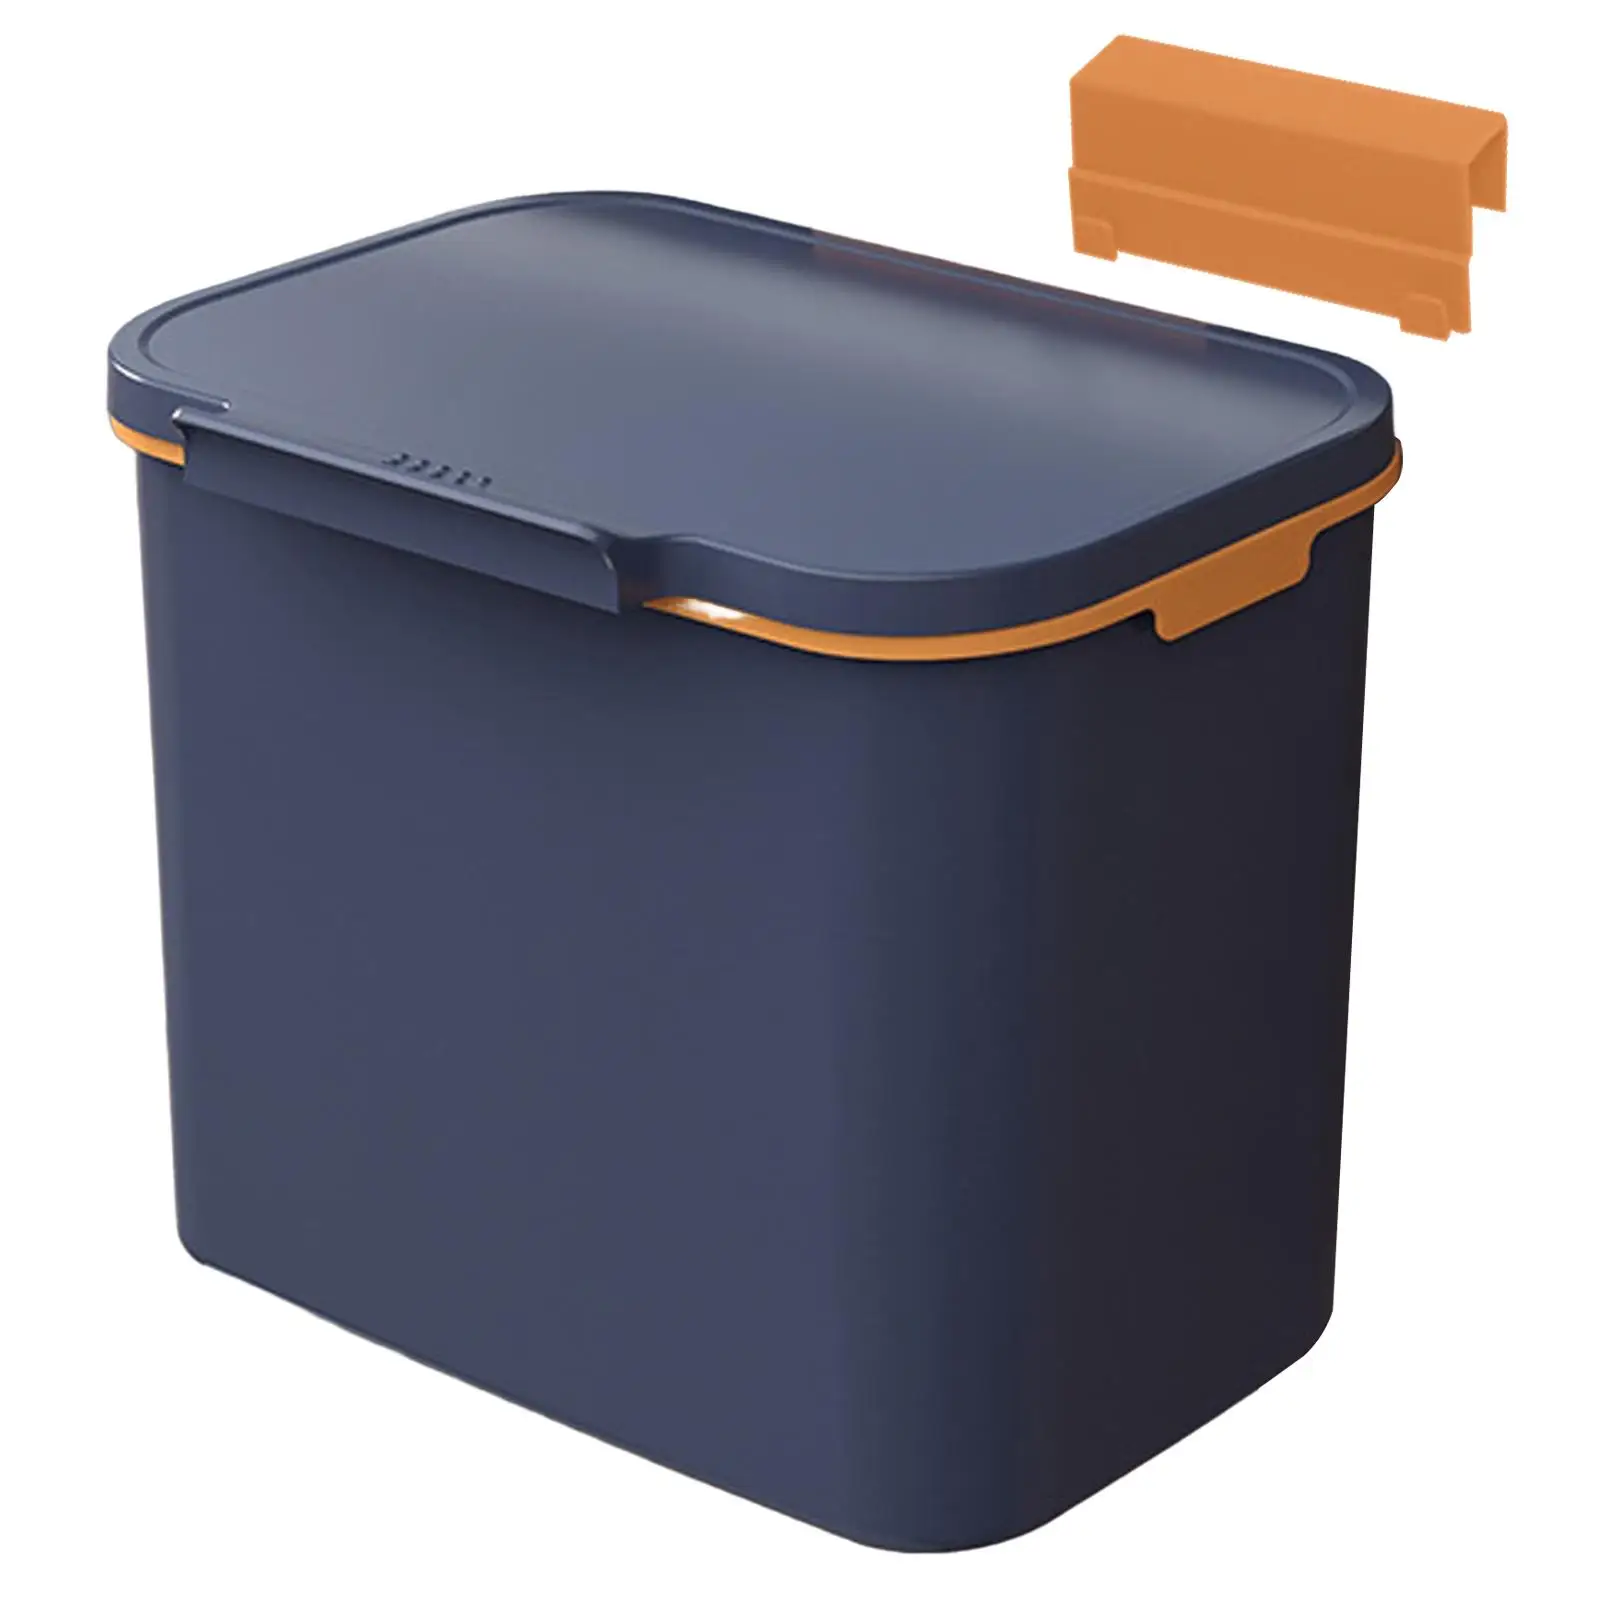    Trash Can with Silding Lid Garbage Can Odourless   ing Garbage Bin